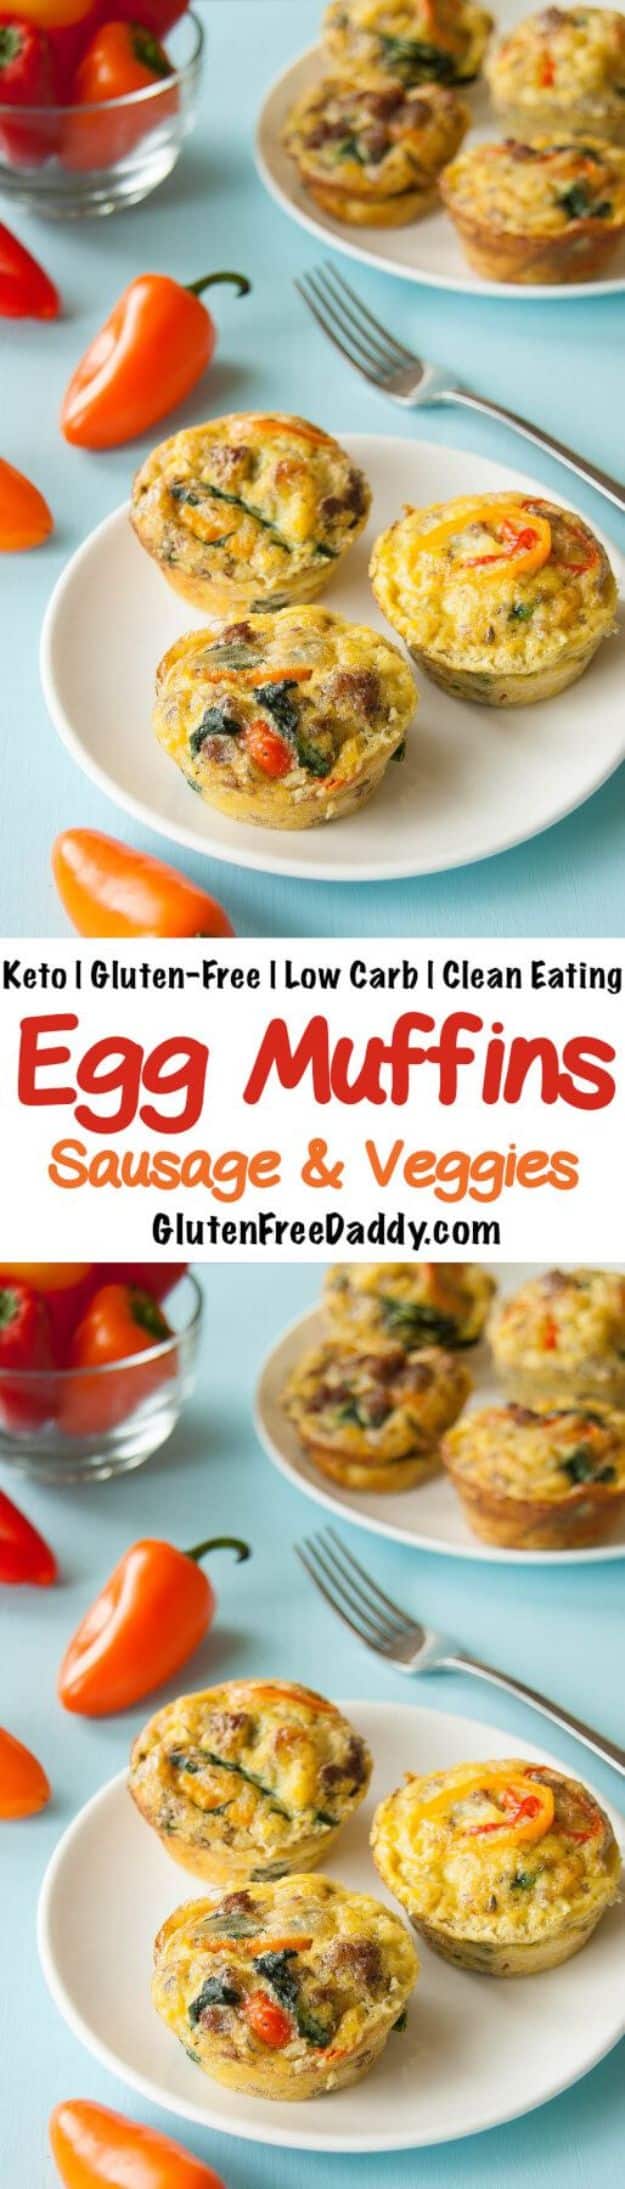 Keto Breakfast Recipes - Keto Egg Muffins with Sausage and Veggies - Low Carb Breakfasts and Morning Meals for the Ketogenic Diet - Low Carbohydrate Foods on the Go - Easy Crockpot Recipes and Casserole - Muffins and Pancakes, Shake and Smoothie, Ideas With No Eggs #keto